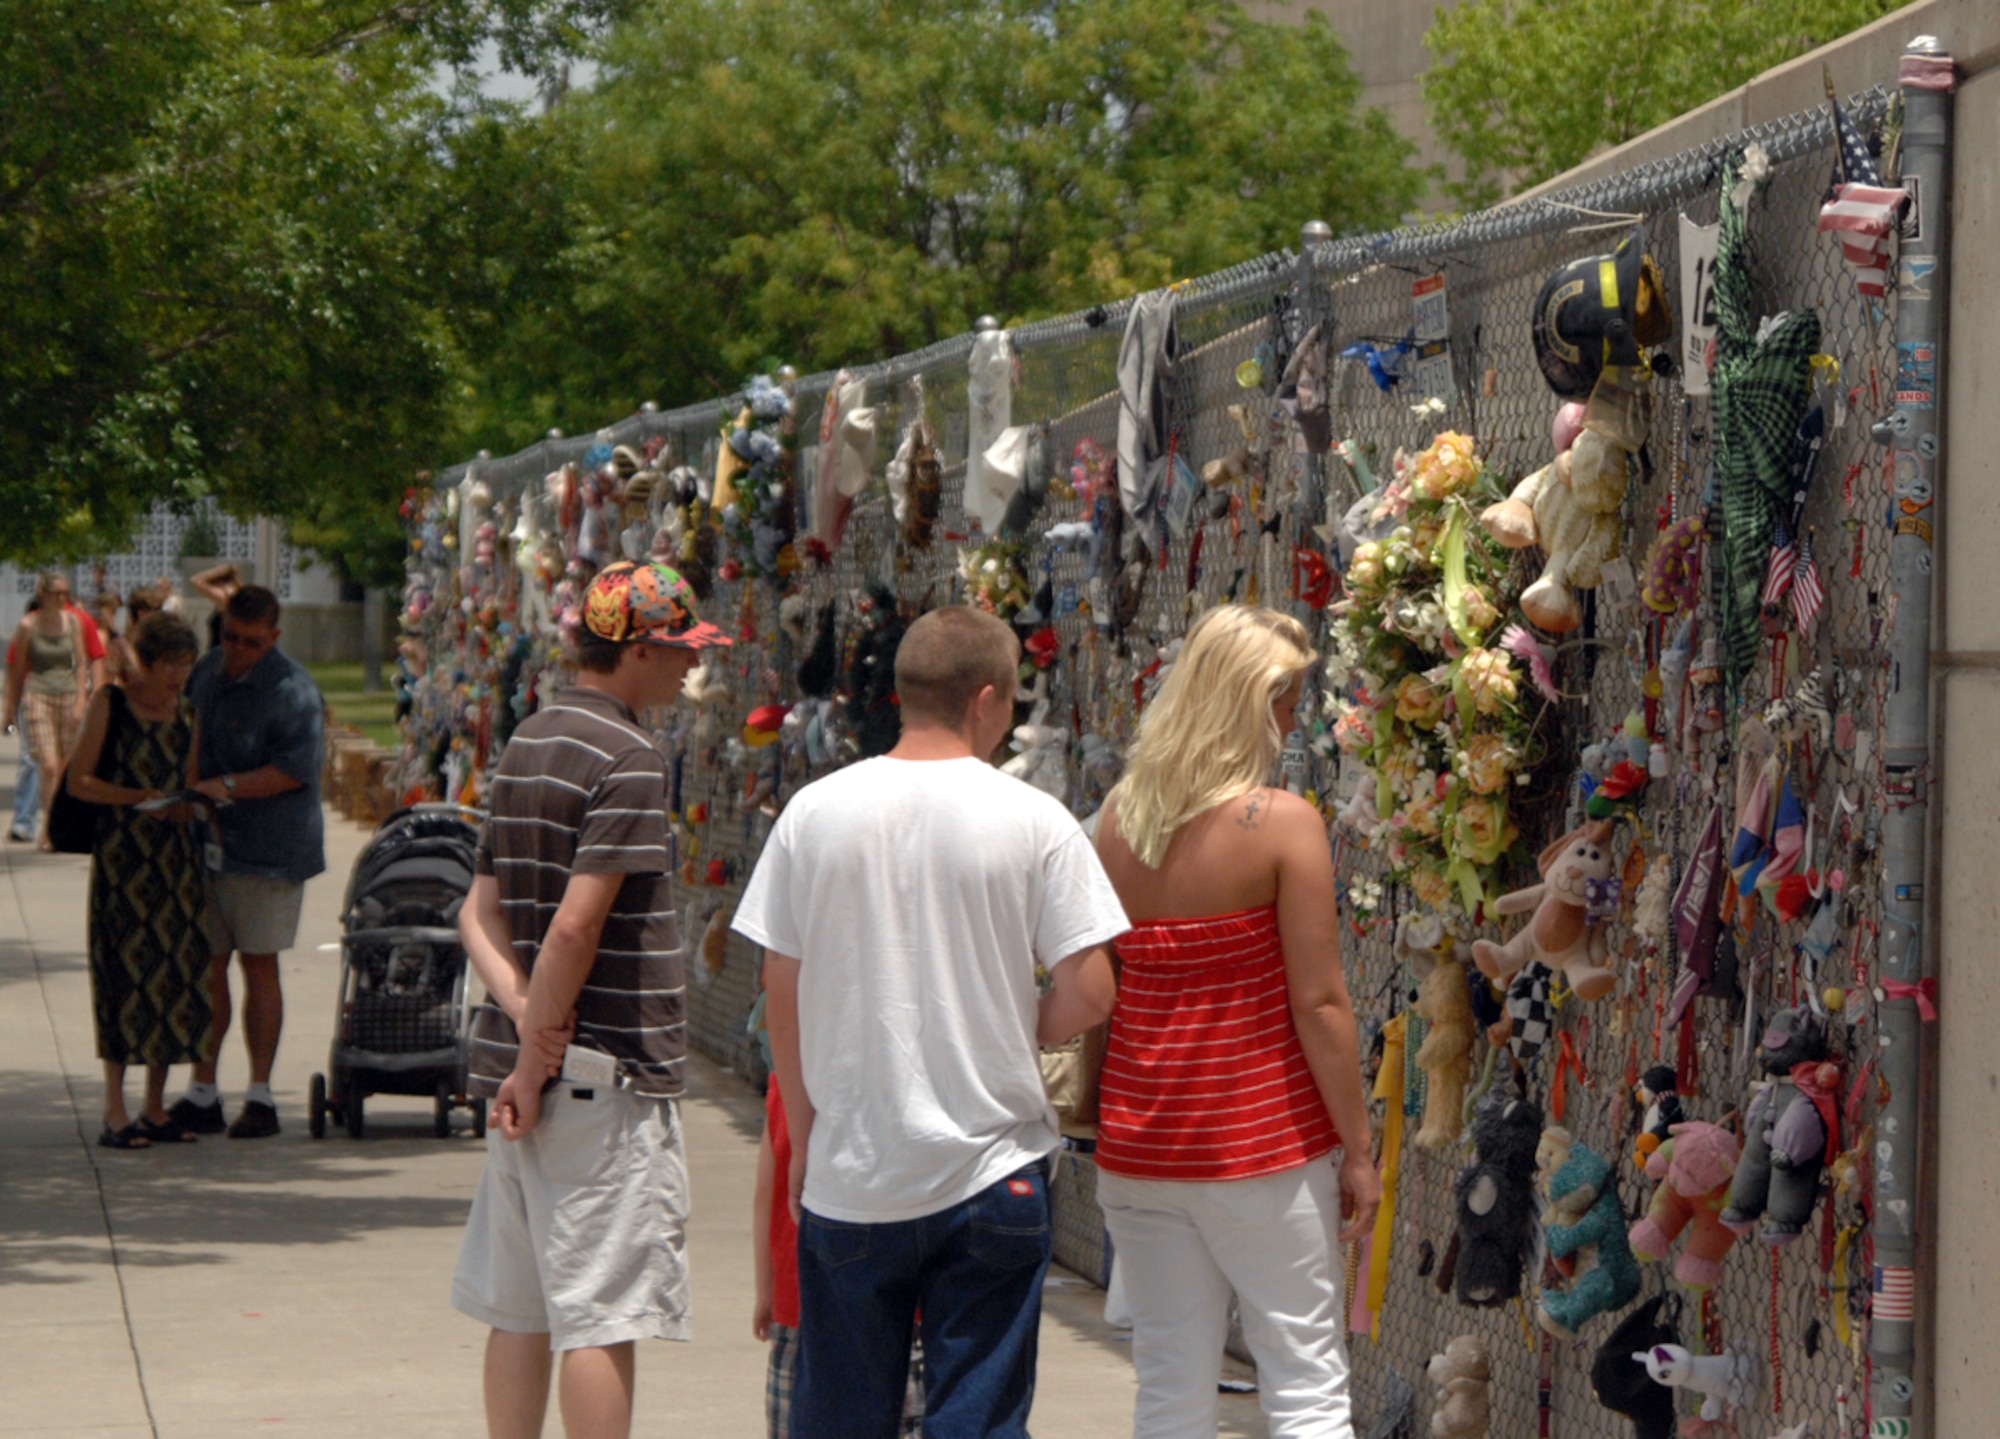 Visitors pay homage to the 168 victims of the April 19, 1995 bombing of the Alfred P. Murrah Federal Building in Oklahoma City, Okla. The memorial fence stretches more than 200 feet and is tribute which gives people the opportunity to leave tokens of remembrance. (U.S. Air Force photo)